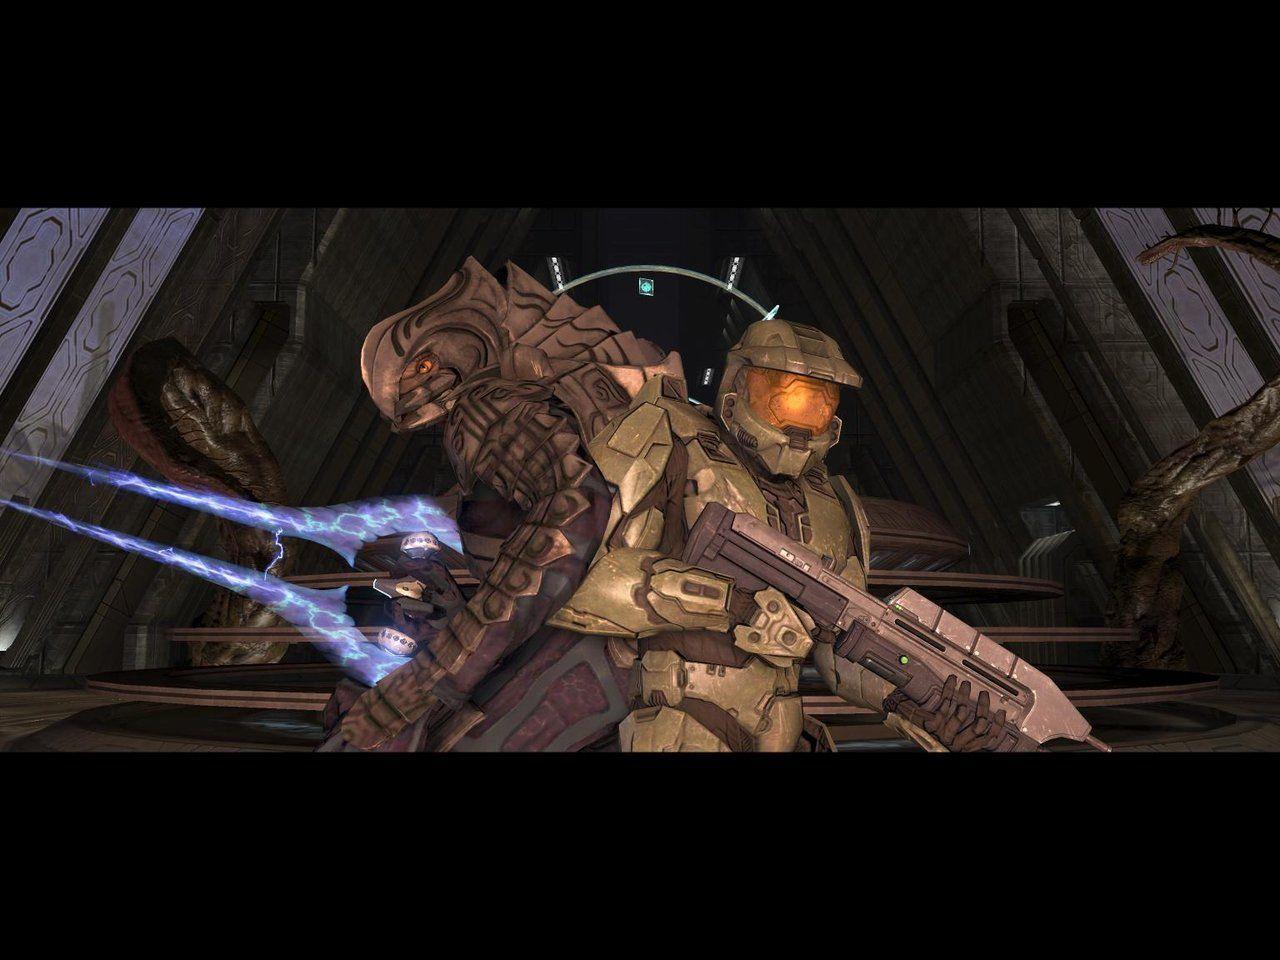 Wallpaper For > Halo Master Chief And Arbiter Wallpaper